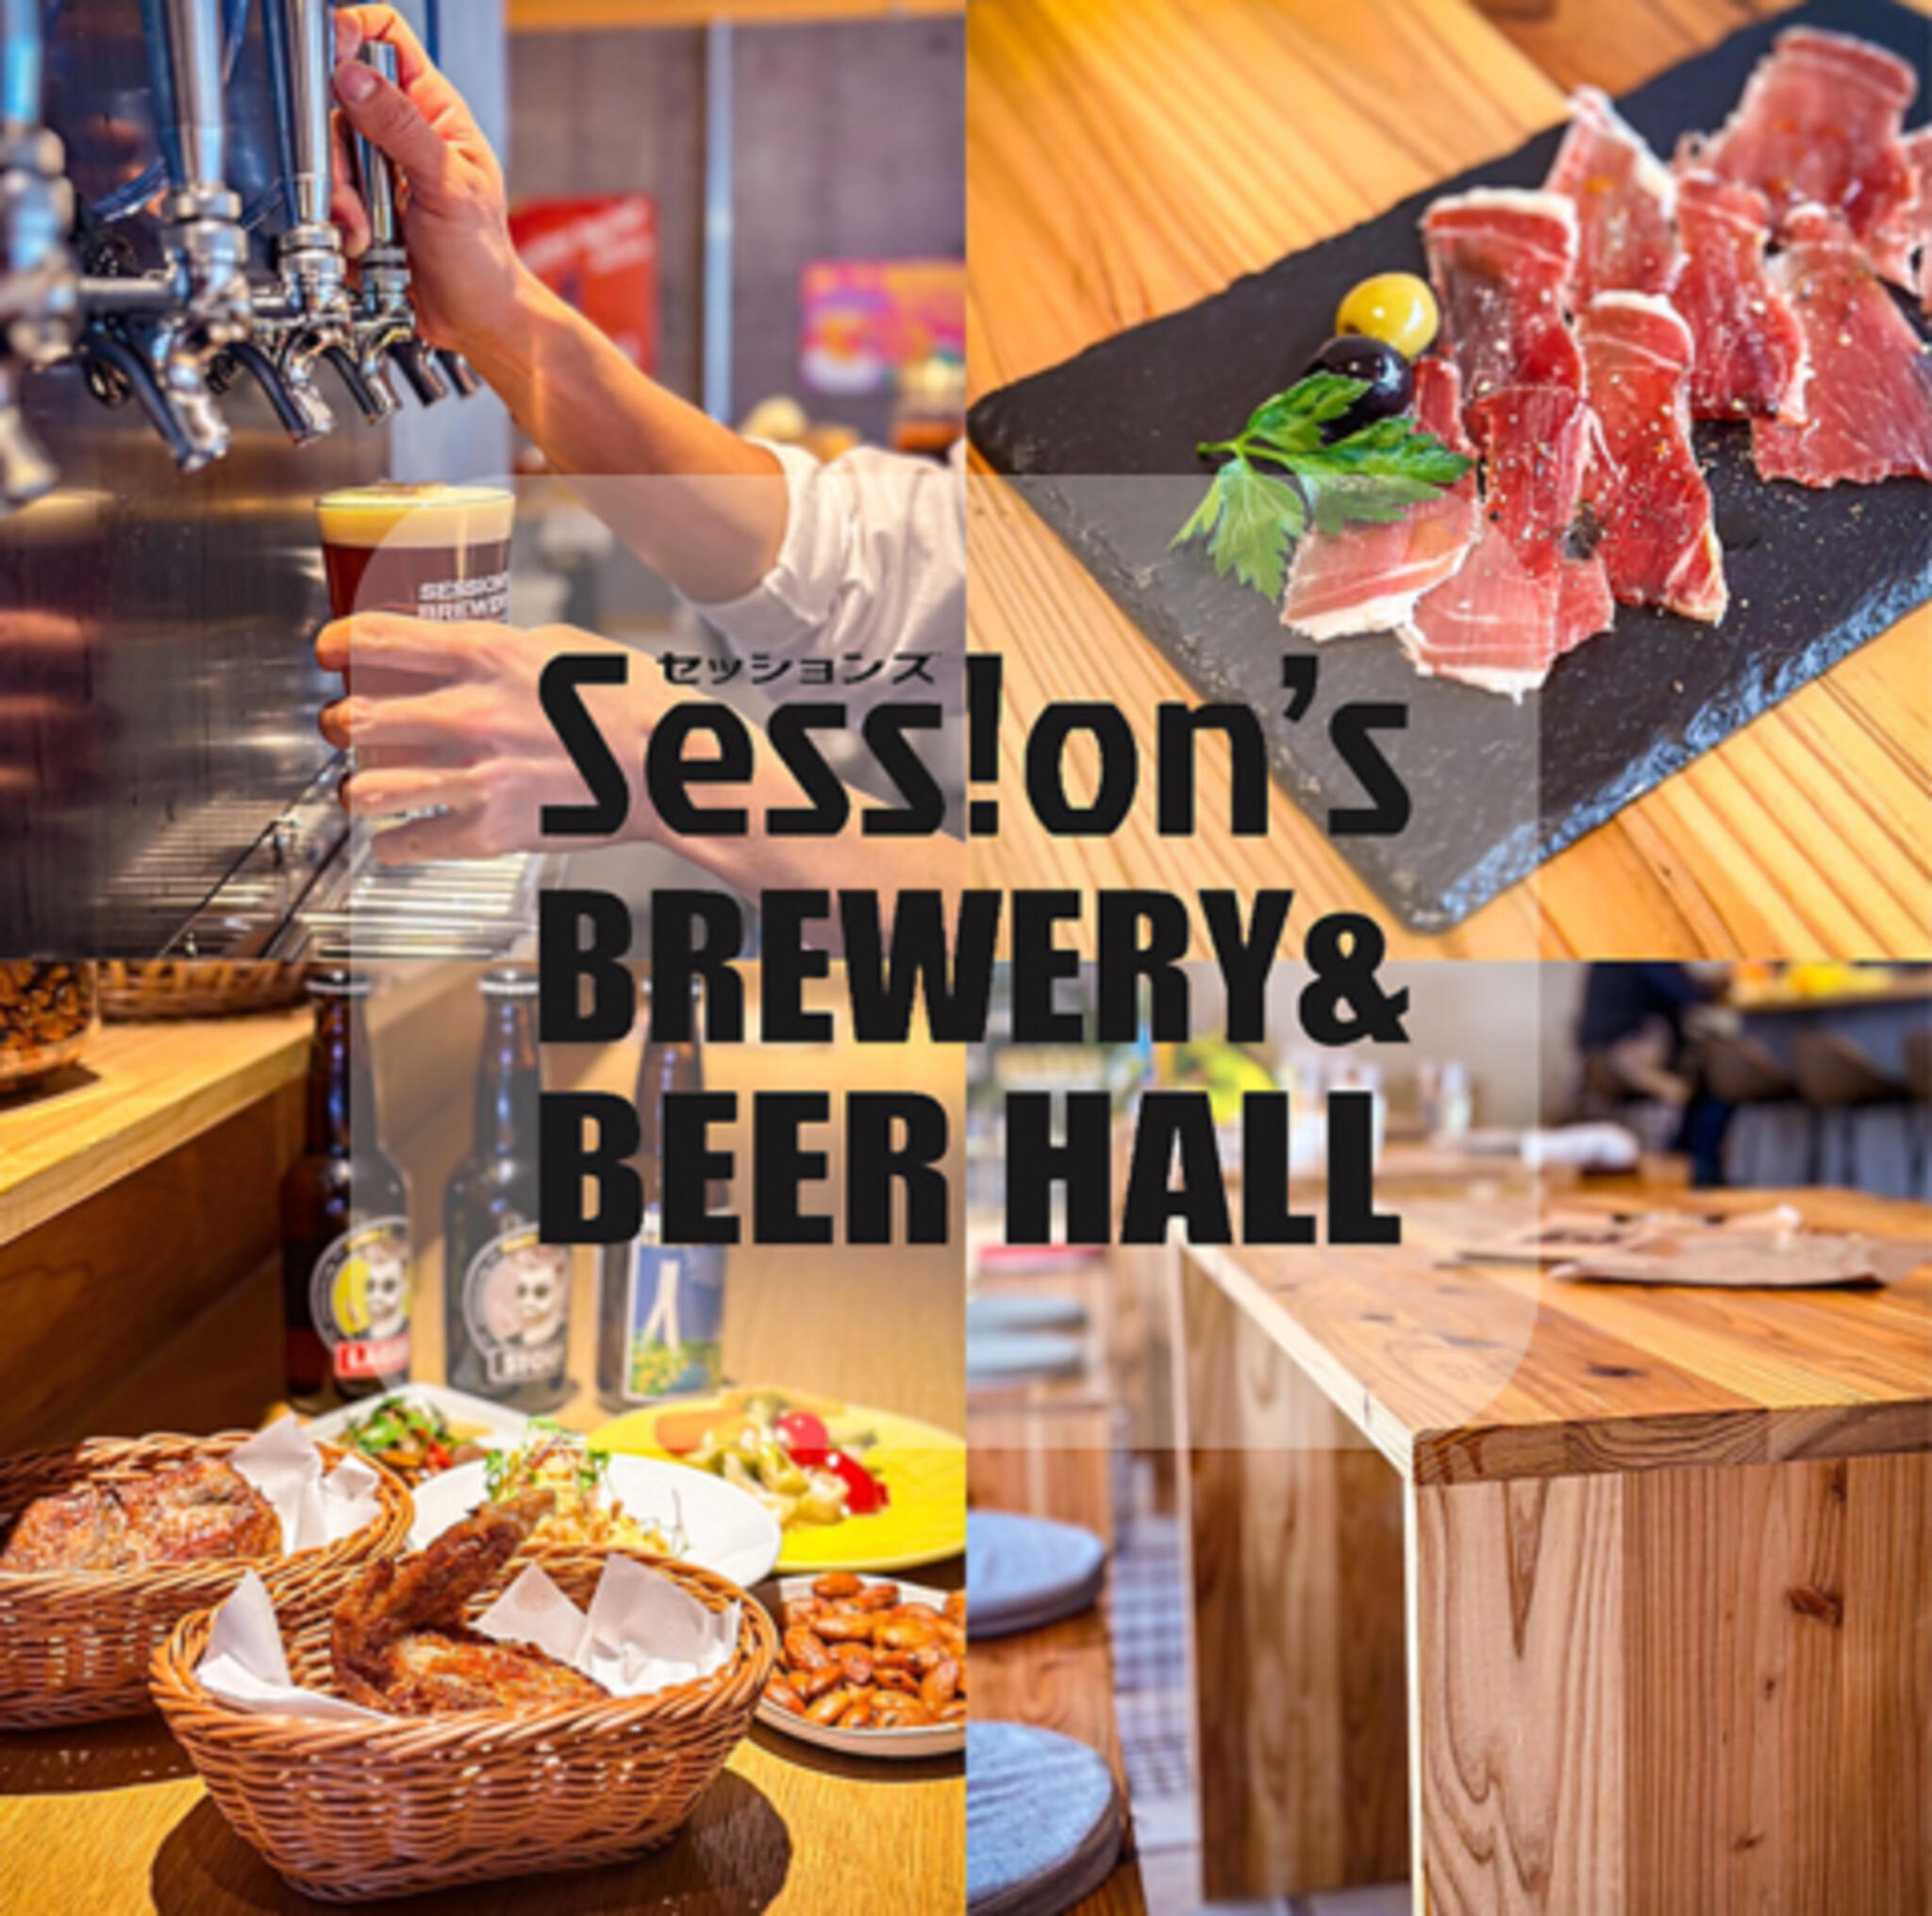 Session's Brewery & Beer Hallの代表写真6